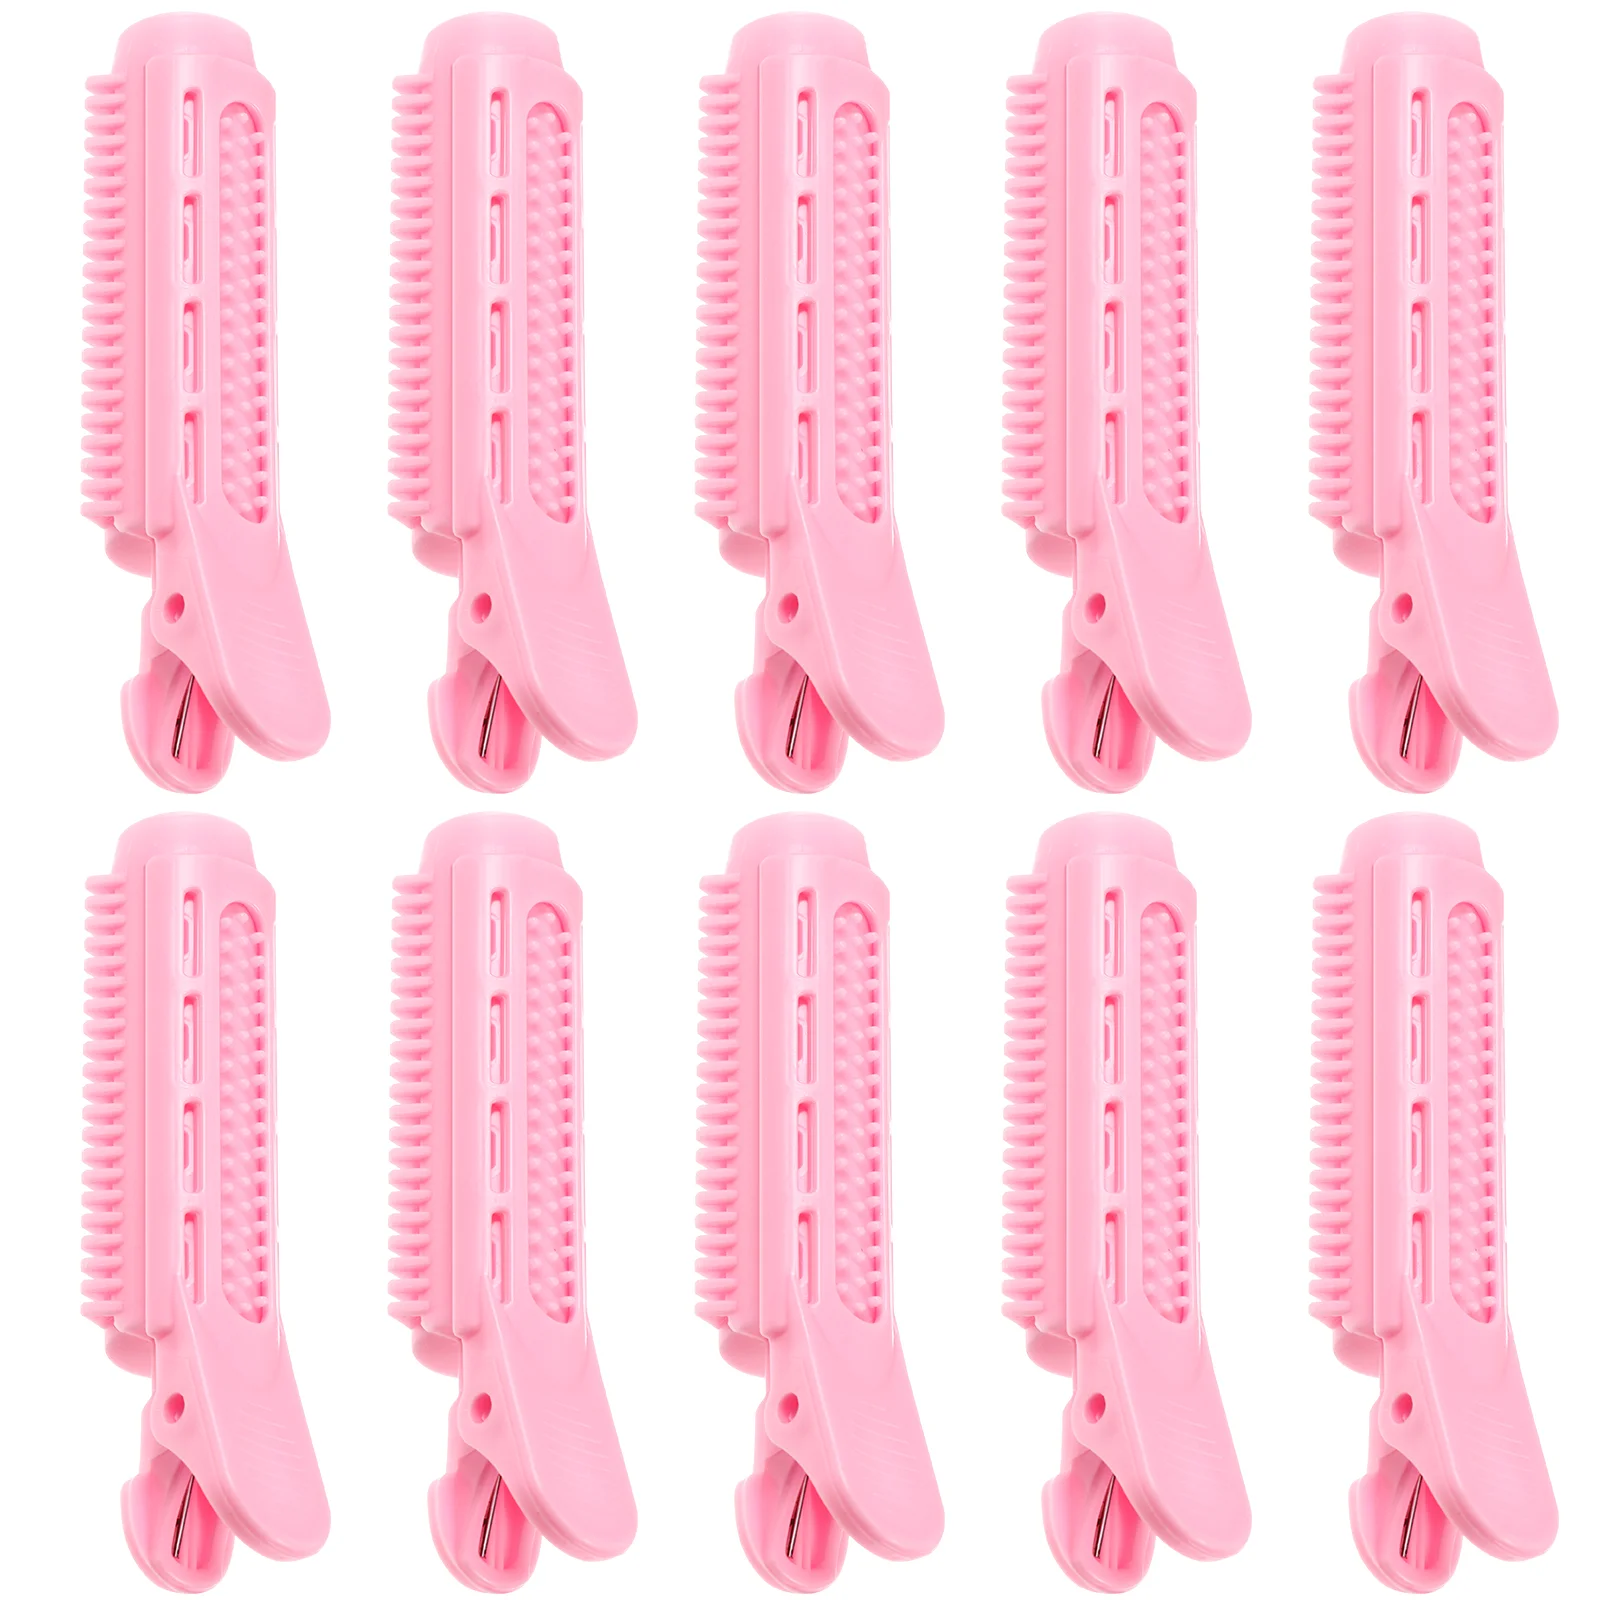 

10 Pcs Hair Curler Root Clips Fluffy Bang Roller Curtain Bangs Abs Rollers for Short